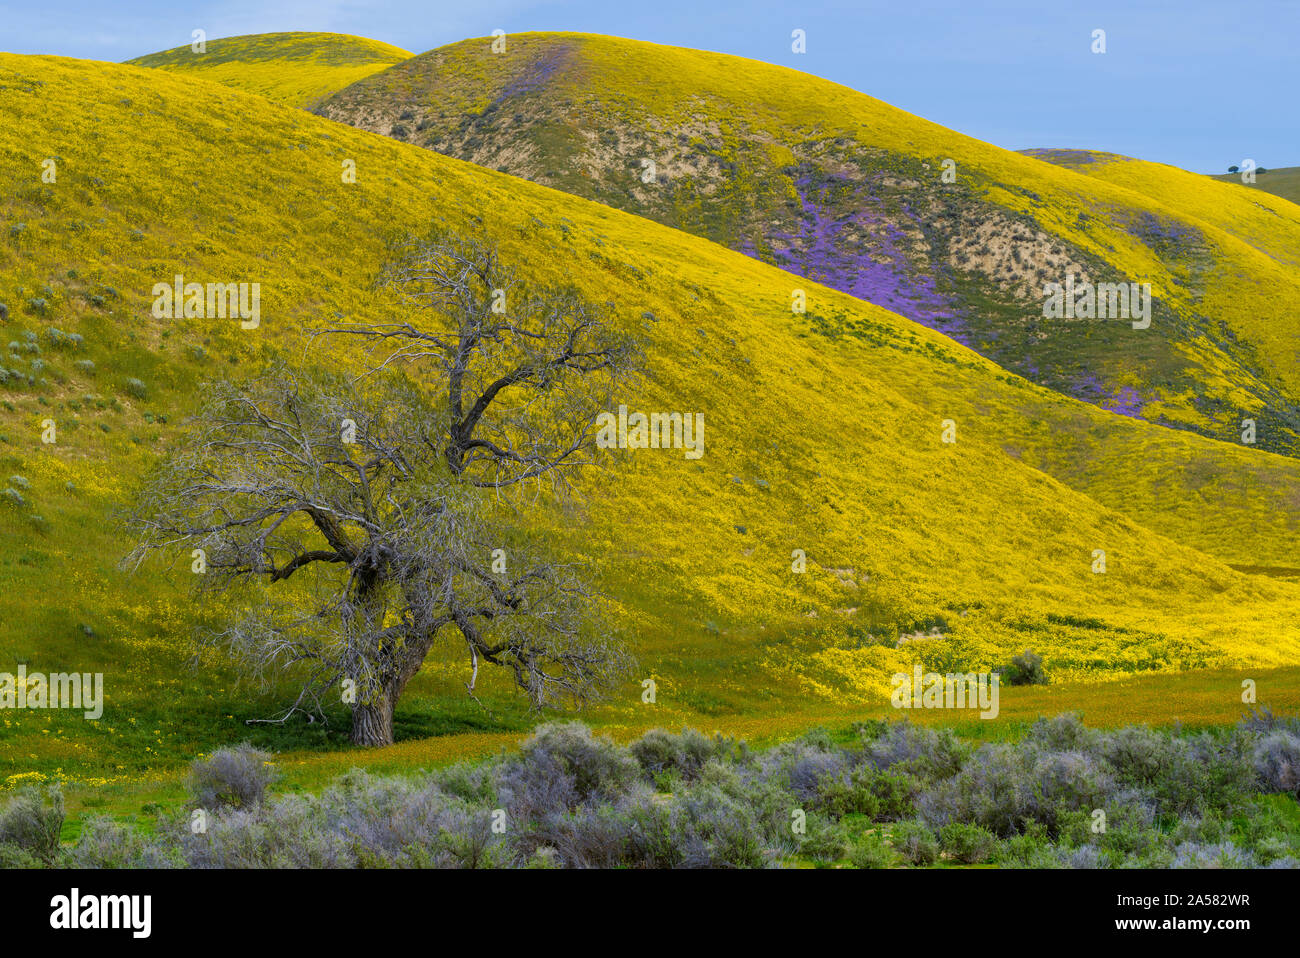 Landscape with rolling hills and yellow wildflowers, Temblor Range, Carrizo Plain National Monument, California, USA Stock Photo